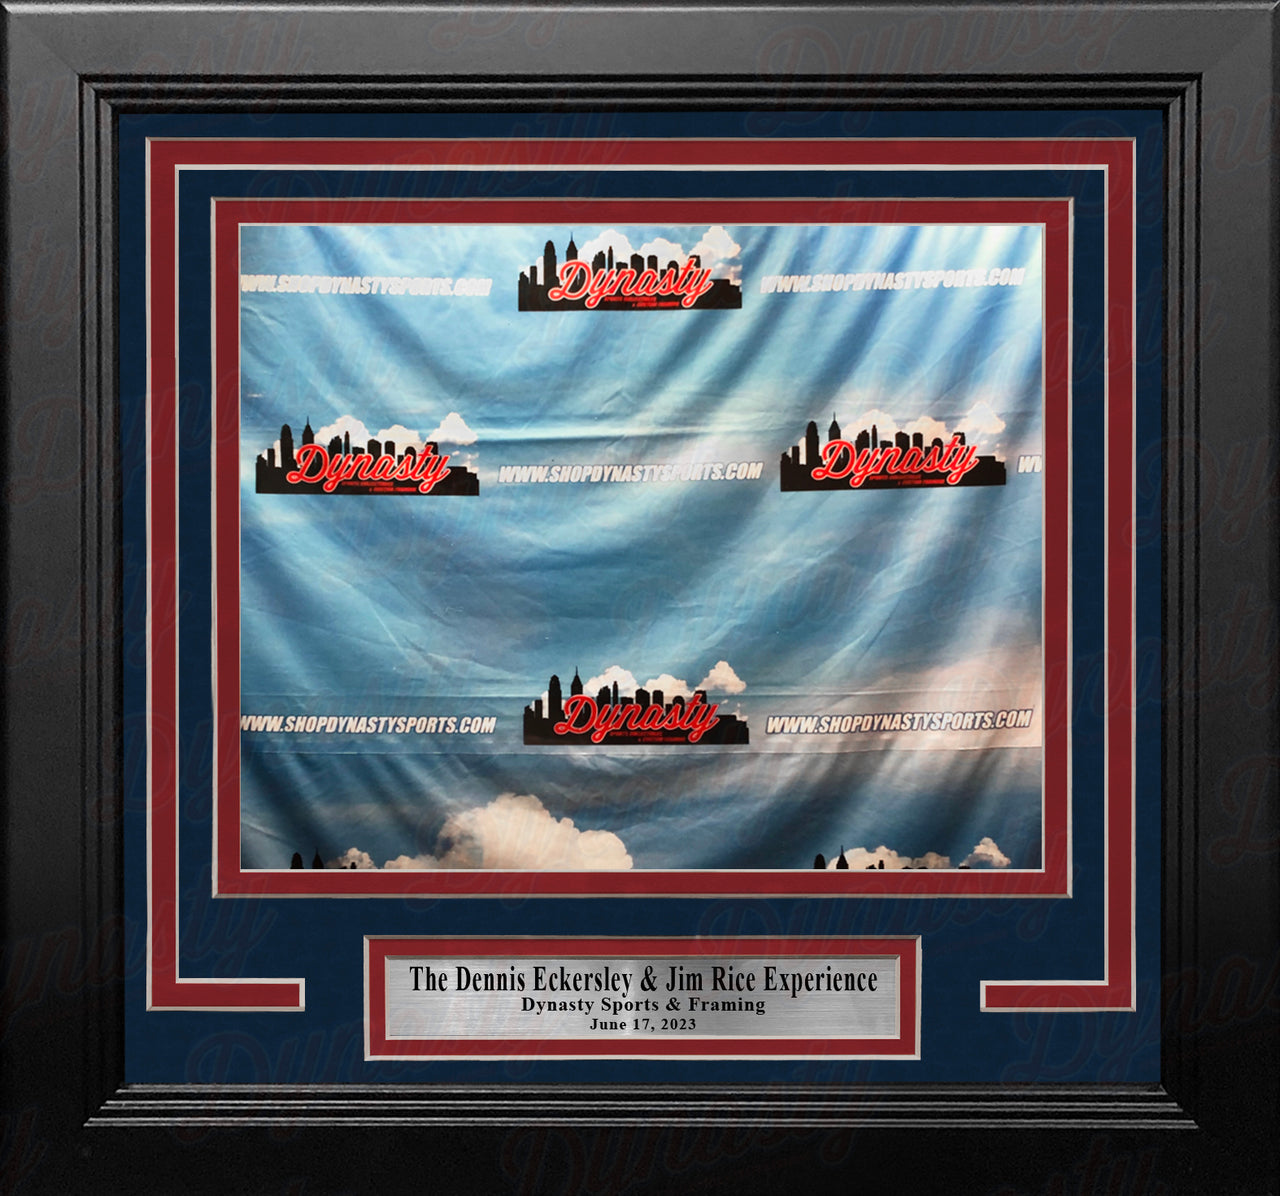 Dennis Eckersley & Jim Rice Boston Red Sox Photo-Op Frame Kit with Commemorative Nameplate - Dynasty Sports & Framing 